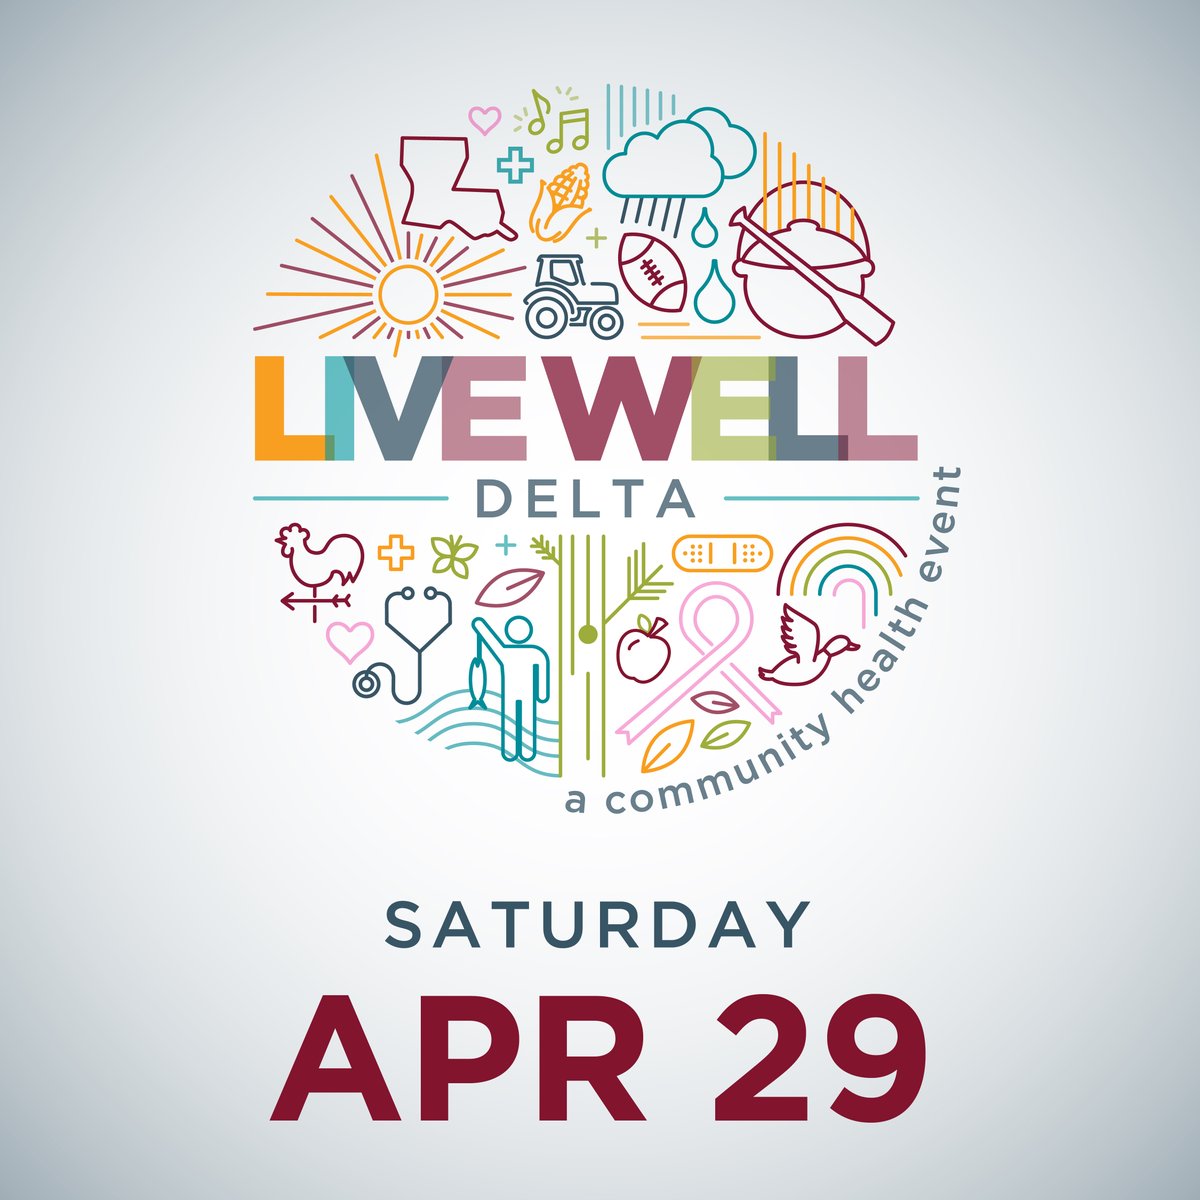 TOMORROW🤩 Get ready for #LiveWell Delta at the Monroe Civic Center Plaza! Excited to see everyone out for fun & entertainment paired with free #cancerscreenings & health resources. Find details to get your appt scheduled now at marybird.org/livewelldelta. #cancerprevention